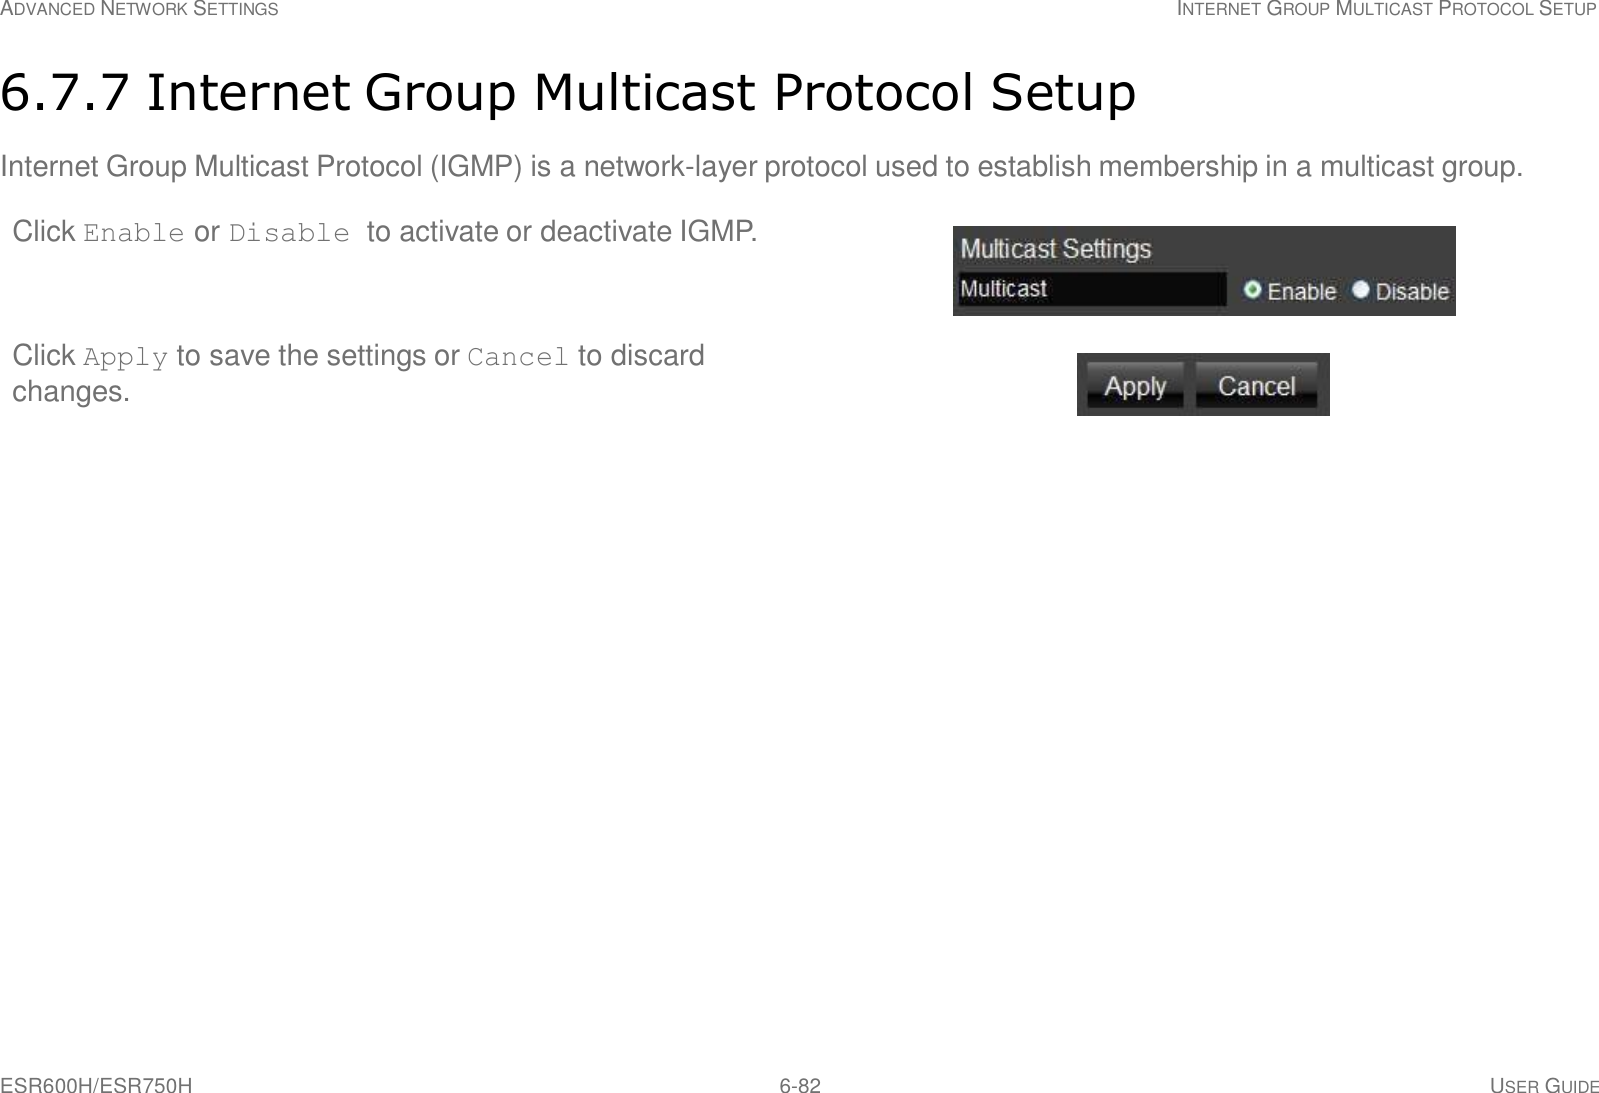 ESR600H/ESR750H 6-82 USER GUIDE ADVANCED NETWORK SETTINGS INTERNET GROUP MULTICAST PROTOCOL SETUP     6.7.7 Internet Group Multicast Protocol Setup  Internet Group Multicast Protocol (IGMP) is a network-layer protocol used to establish membership in a multicast group. Click Enable or Disable to activate or deactivate IGMP.    Click Apply to save the settings or Cancel to discard changes. 